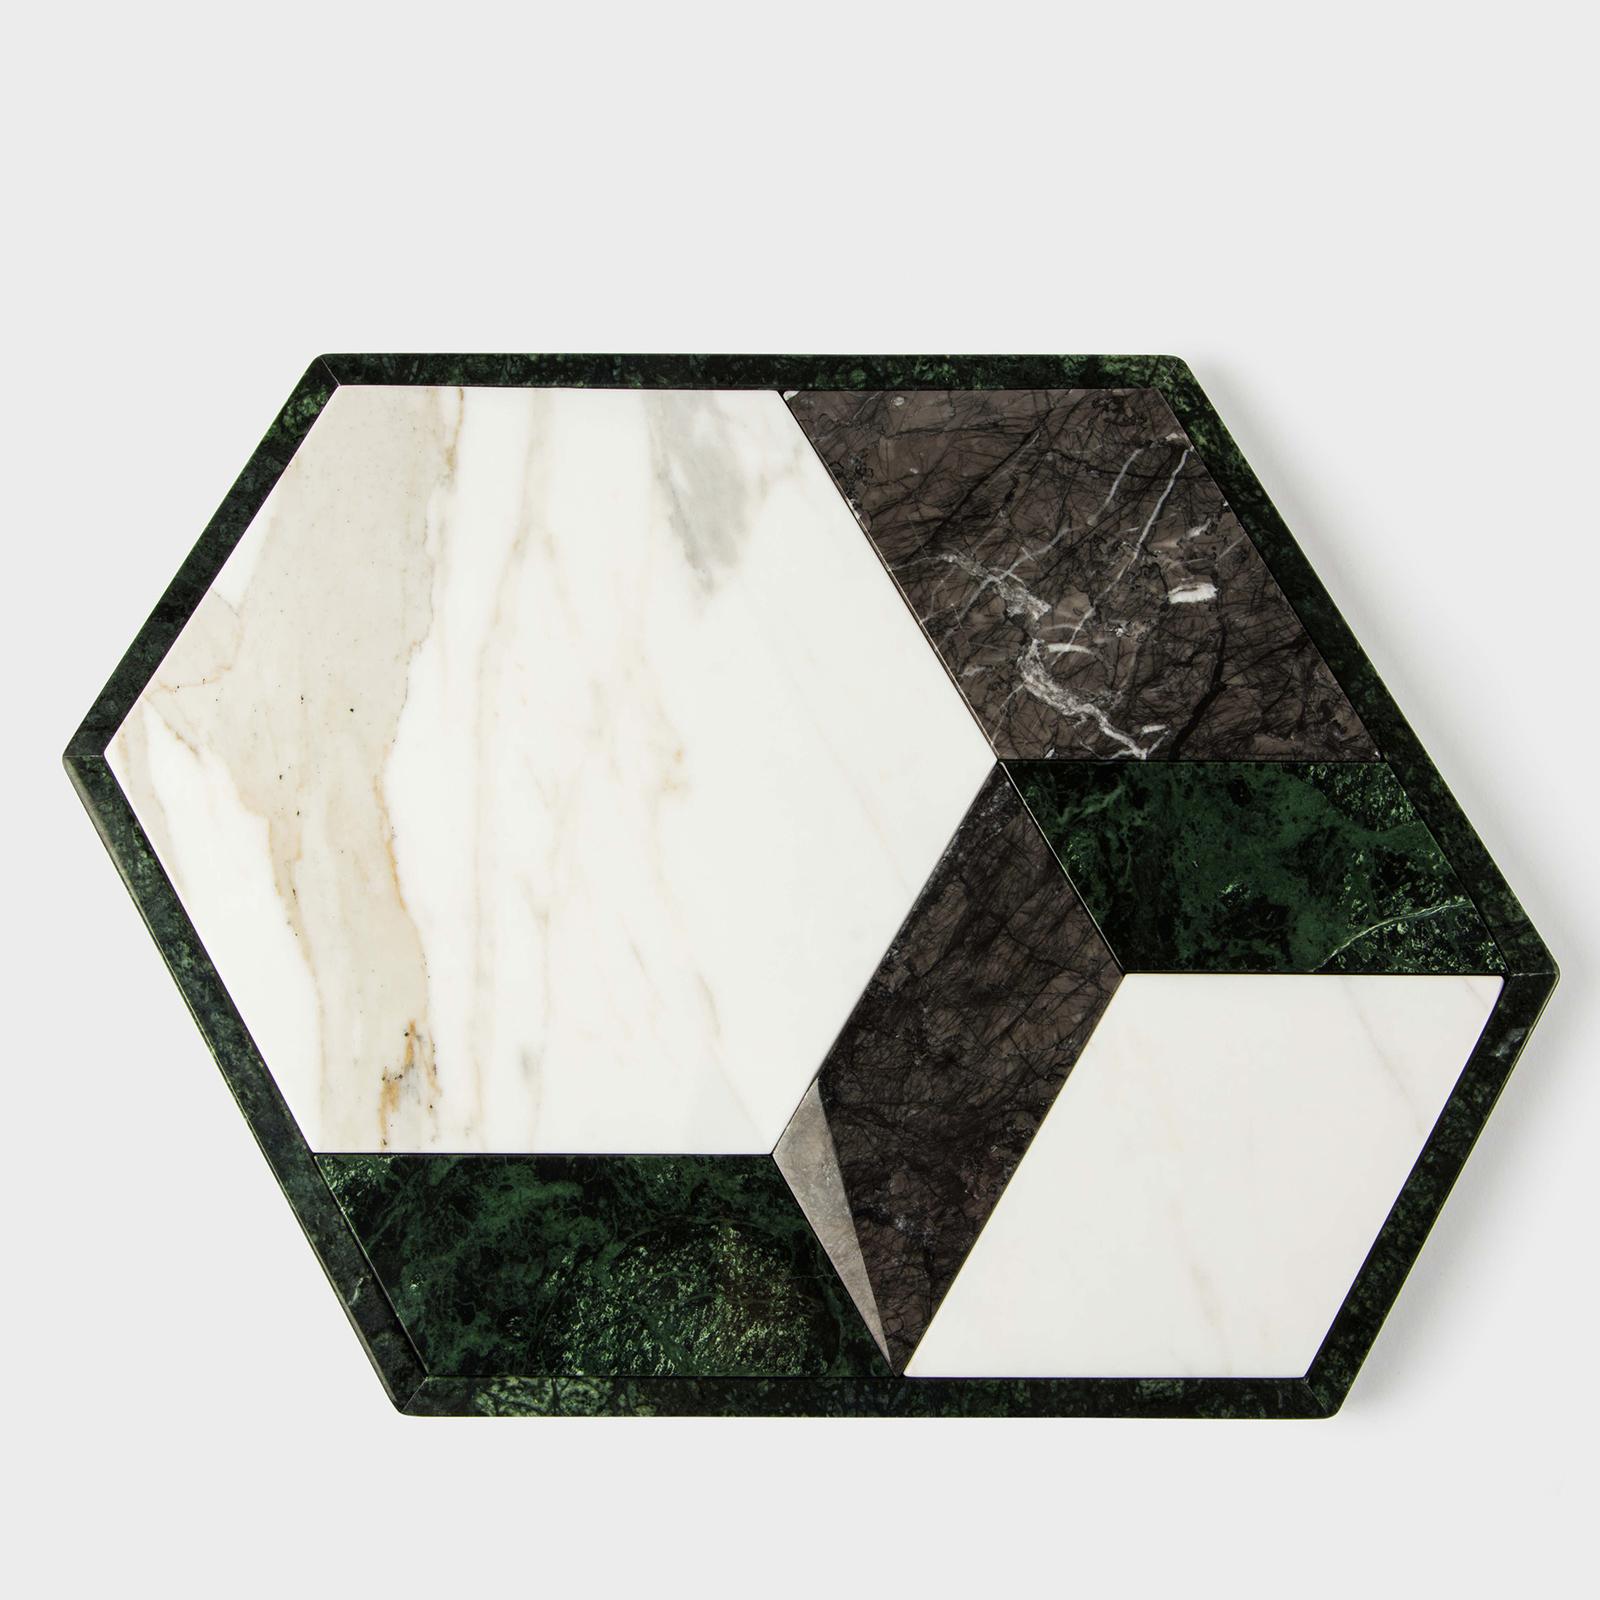 This opulent tray was crafted of Guatemala green marble and boasts an irregular hexagonal shape (1 cm thick with a thin edge of 1.5 cm) enclosing six elements that can be detached and used as stunning accessories to enrich any occasion. The six